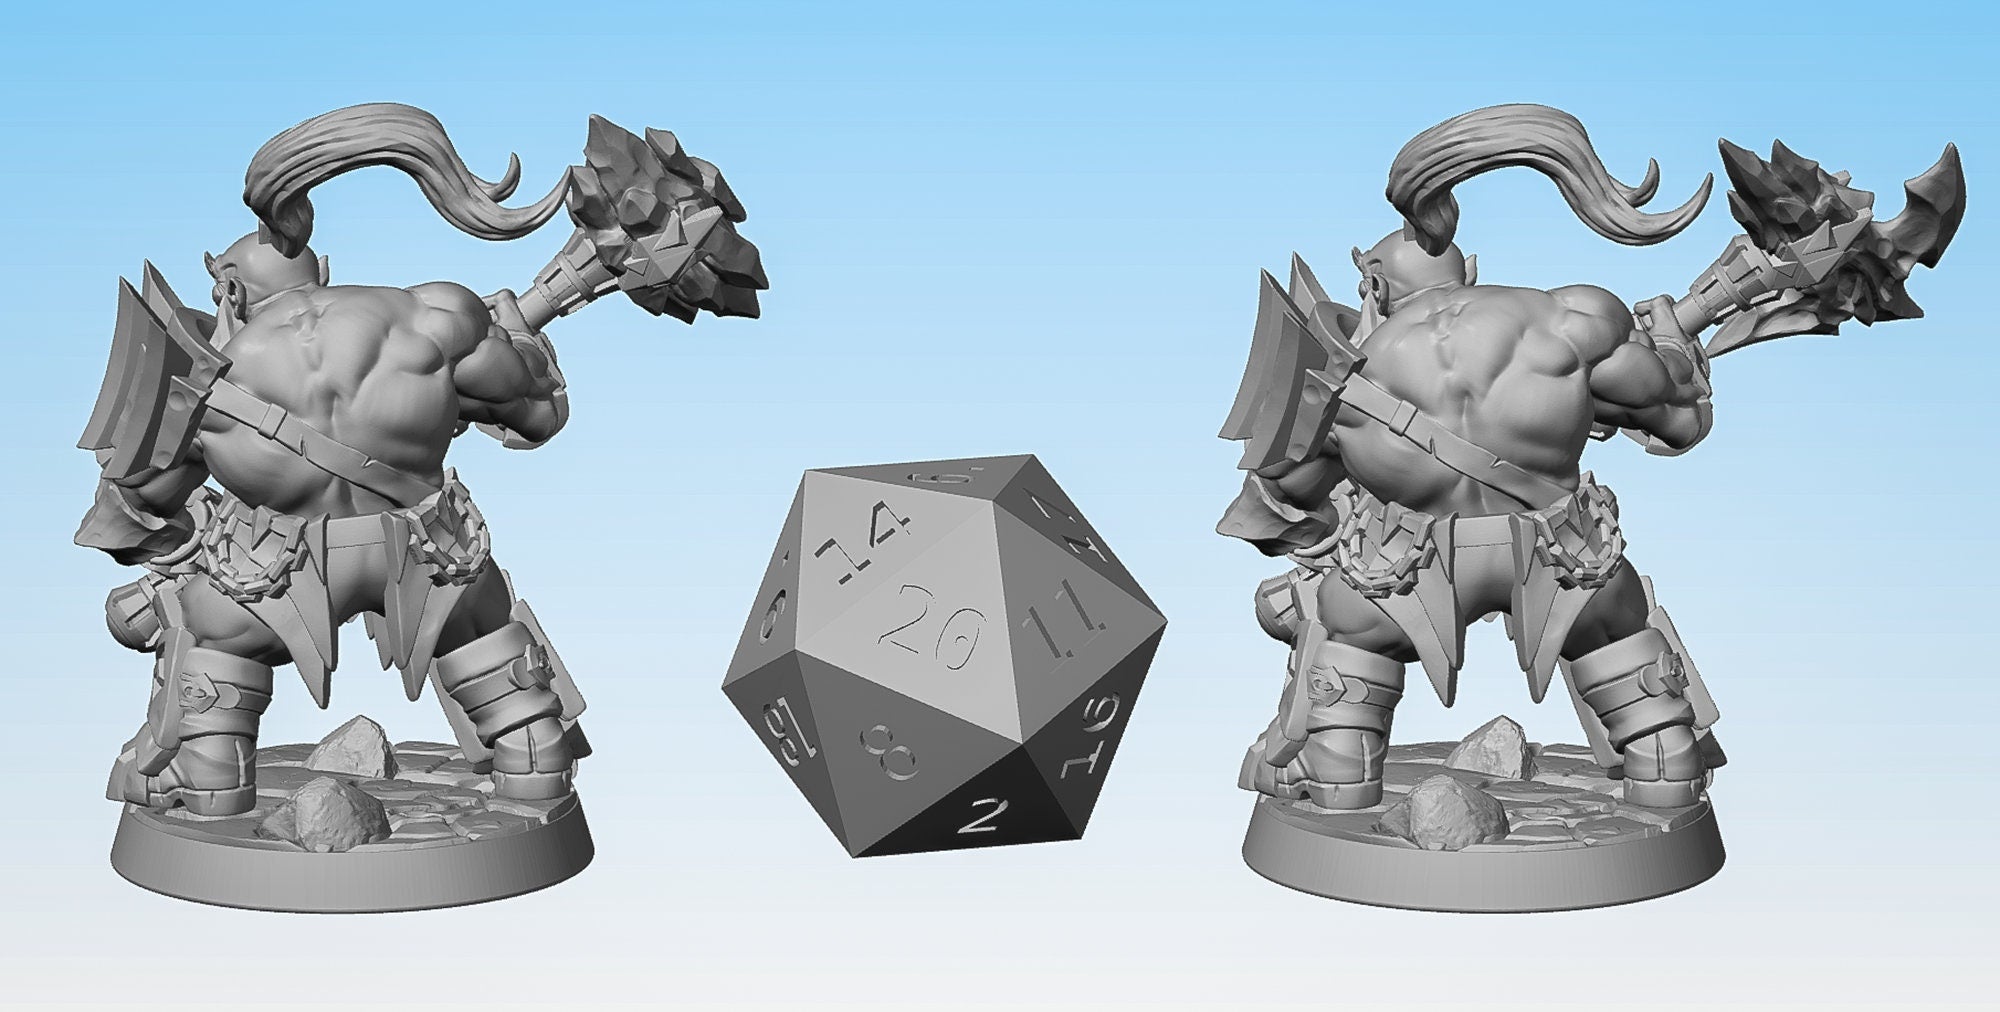 DWARF BARBARIAN "Flameseeker C" (2 Versions) | Dungeons and Dragons | DnD | Pathfinder | Tabletop | RPG | Hero Size | 28 mm-Role Playing Miniatures